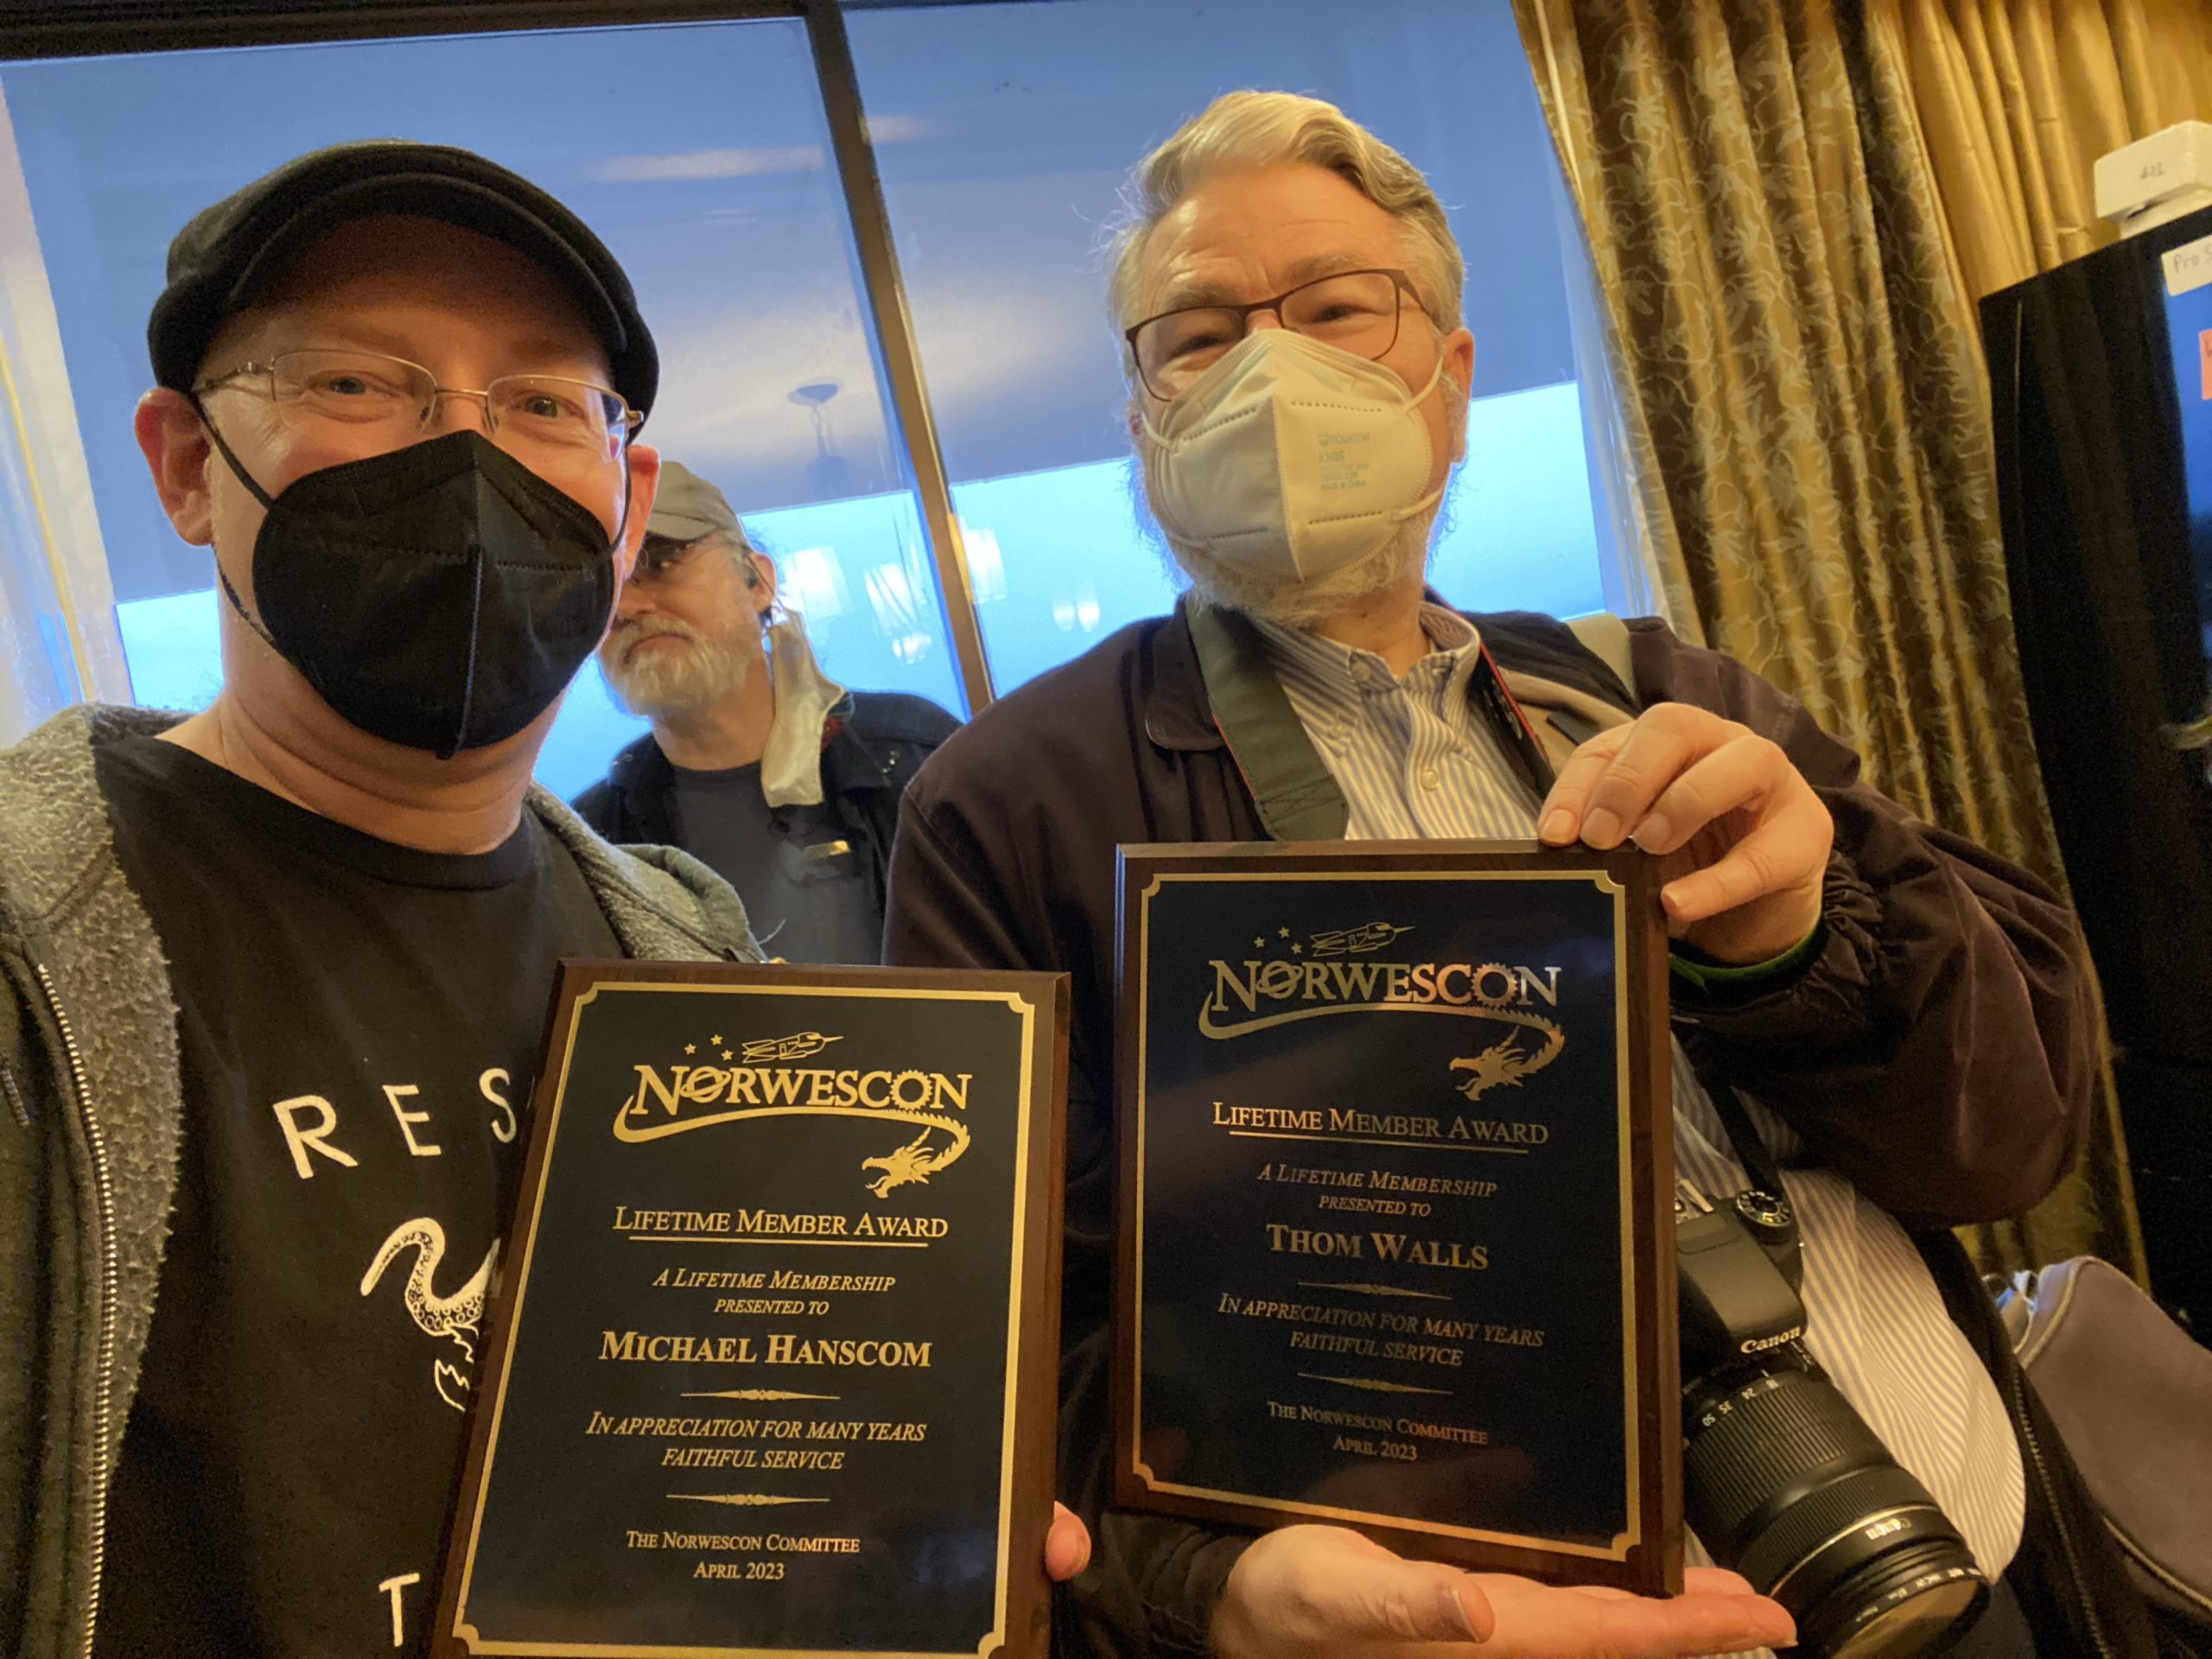 Me and Thom holding our Lifetime Member award plaques.